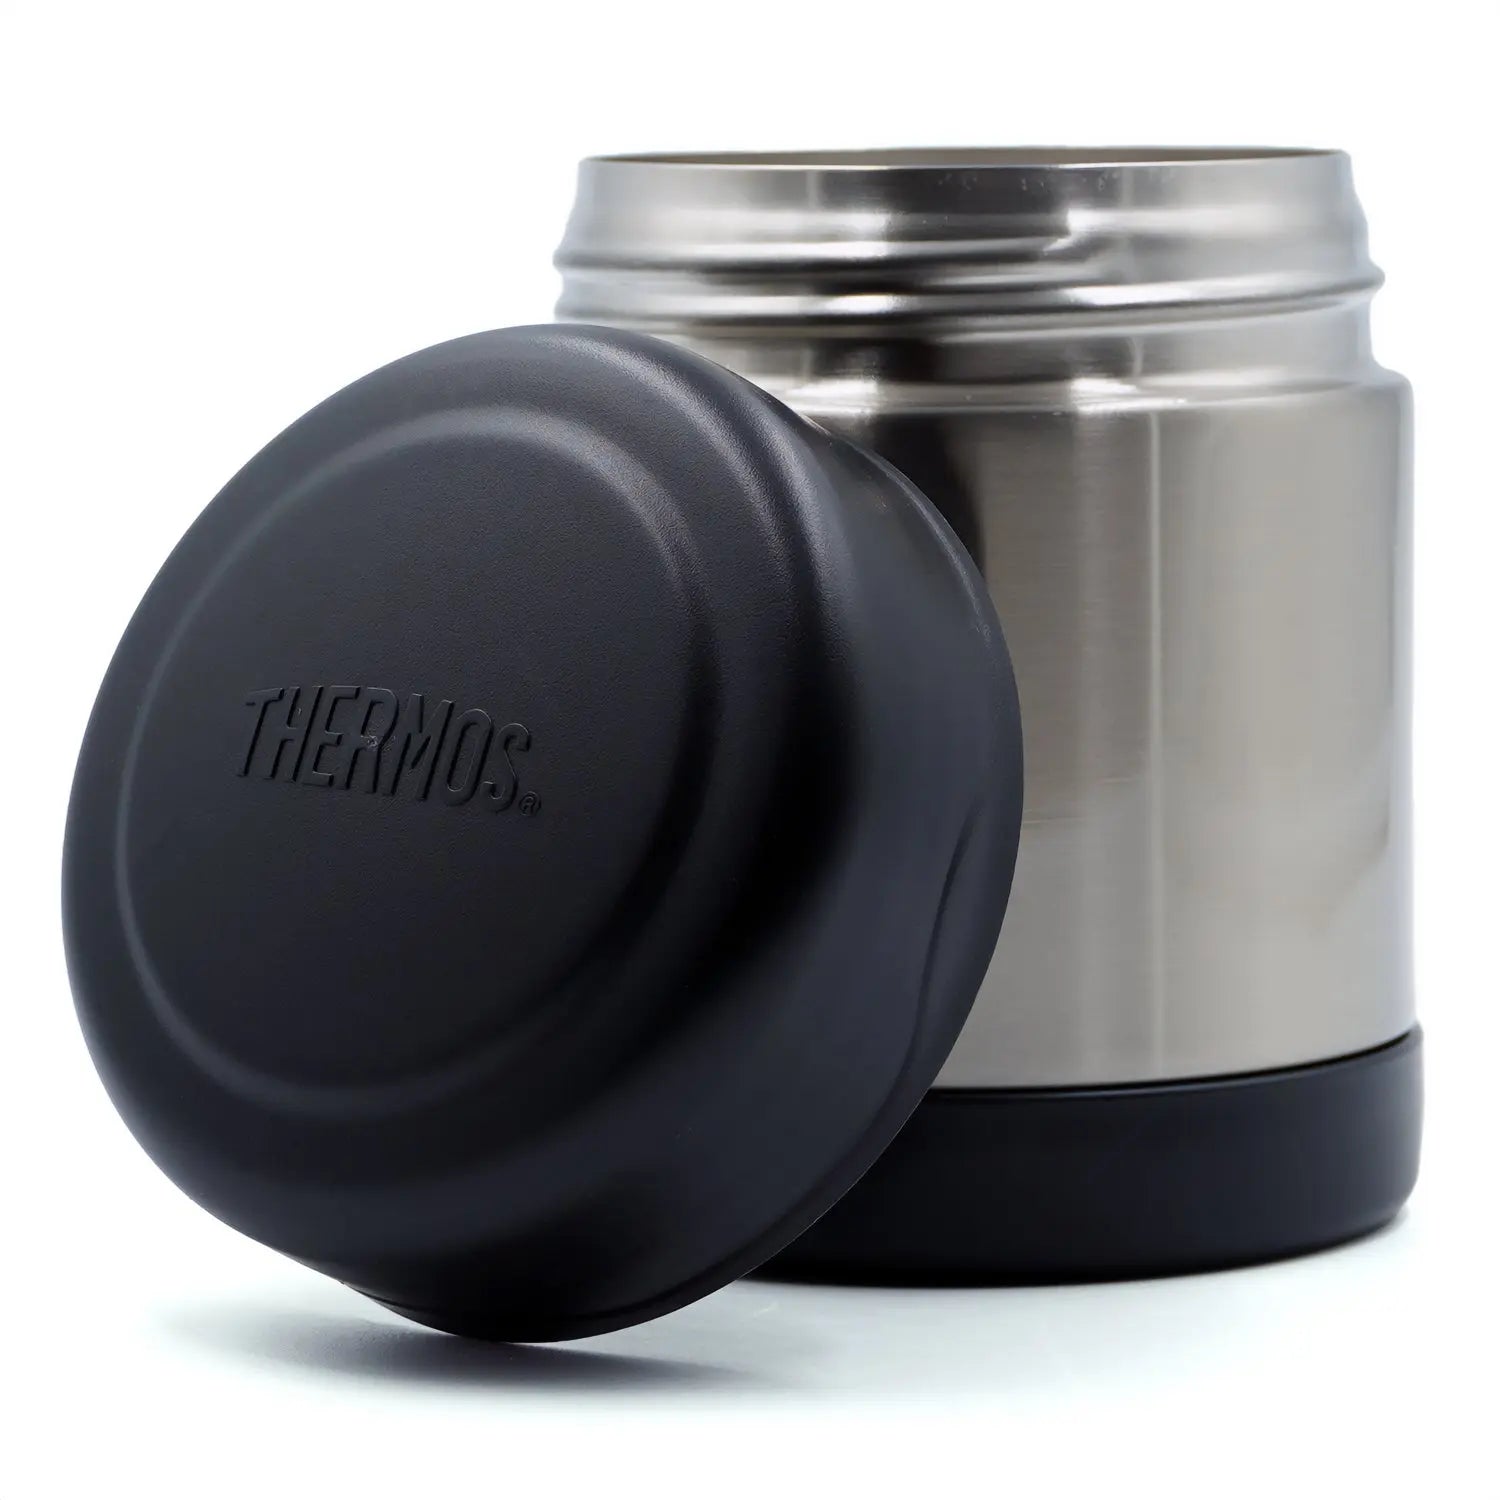 Thermos 10 oz. Vacuum Insulated Stainless Steel Food Jar - Black/Stainless Steel Thermos